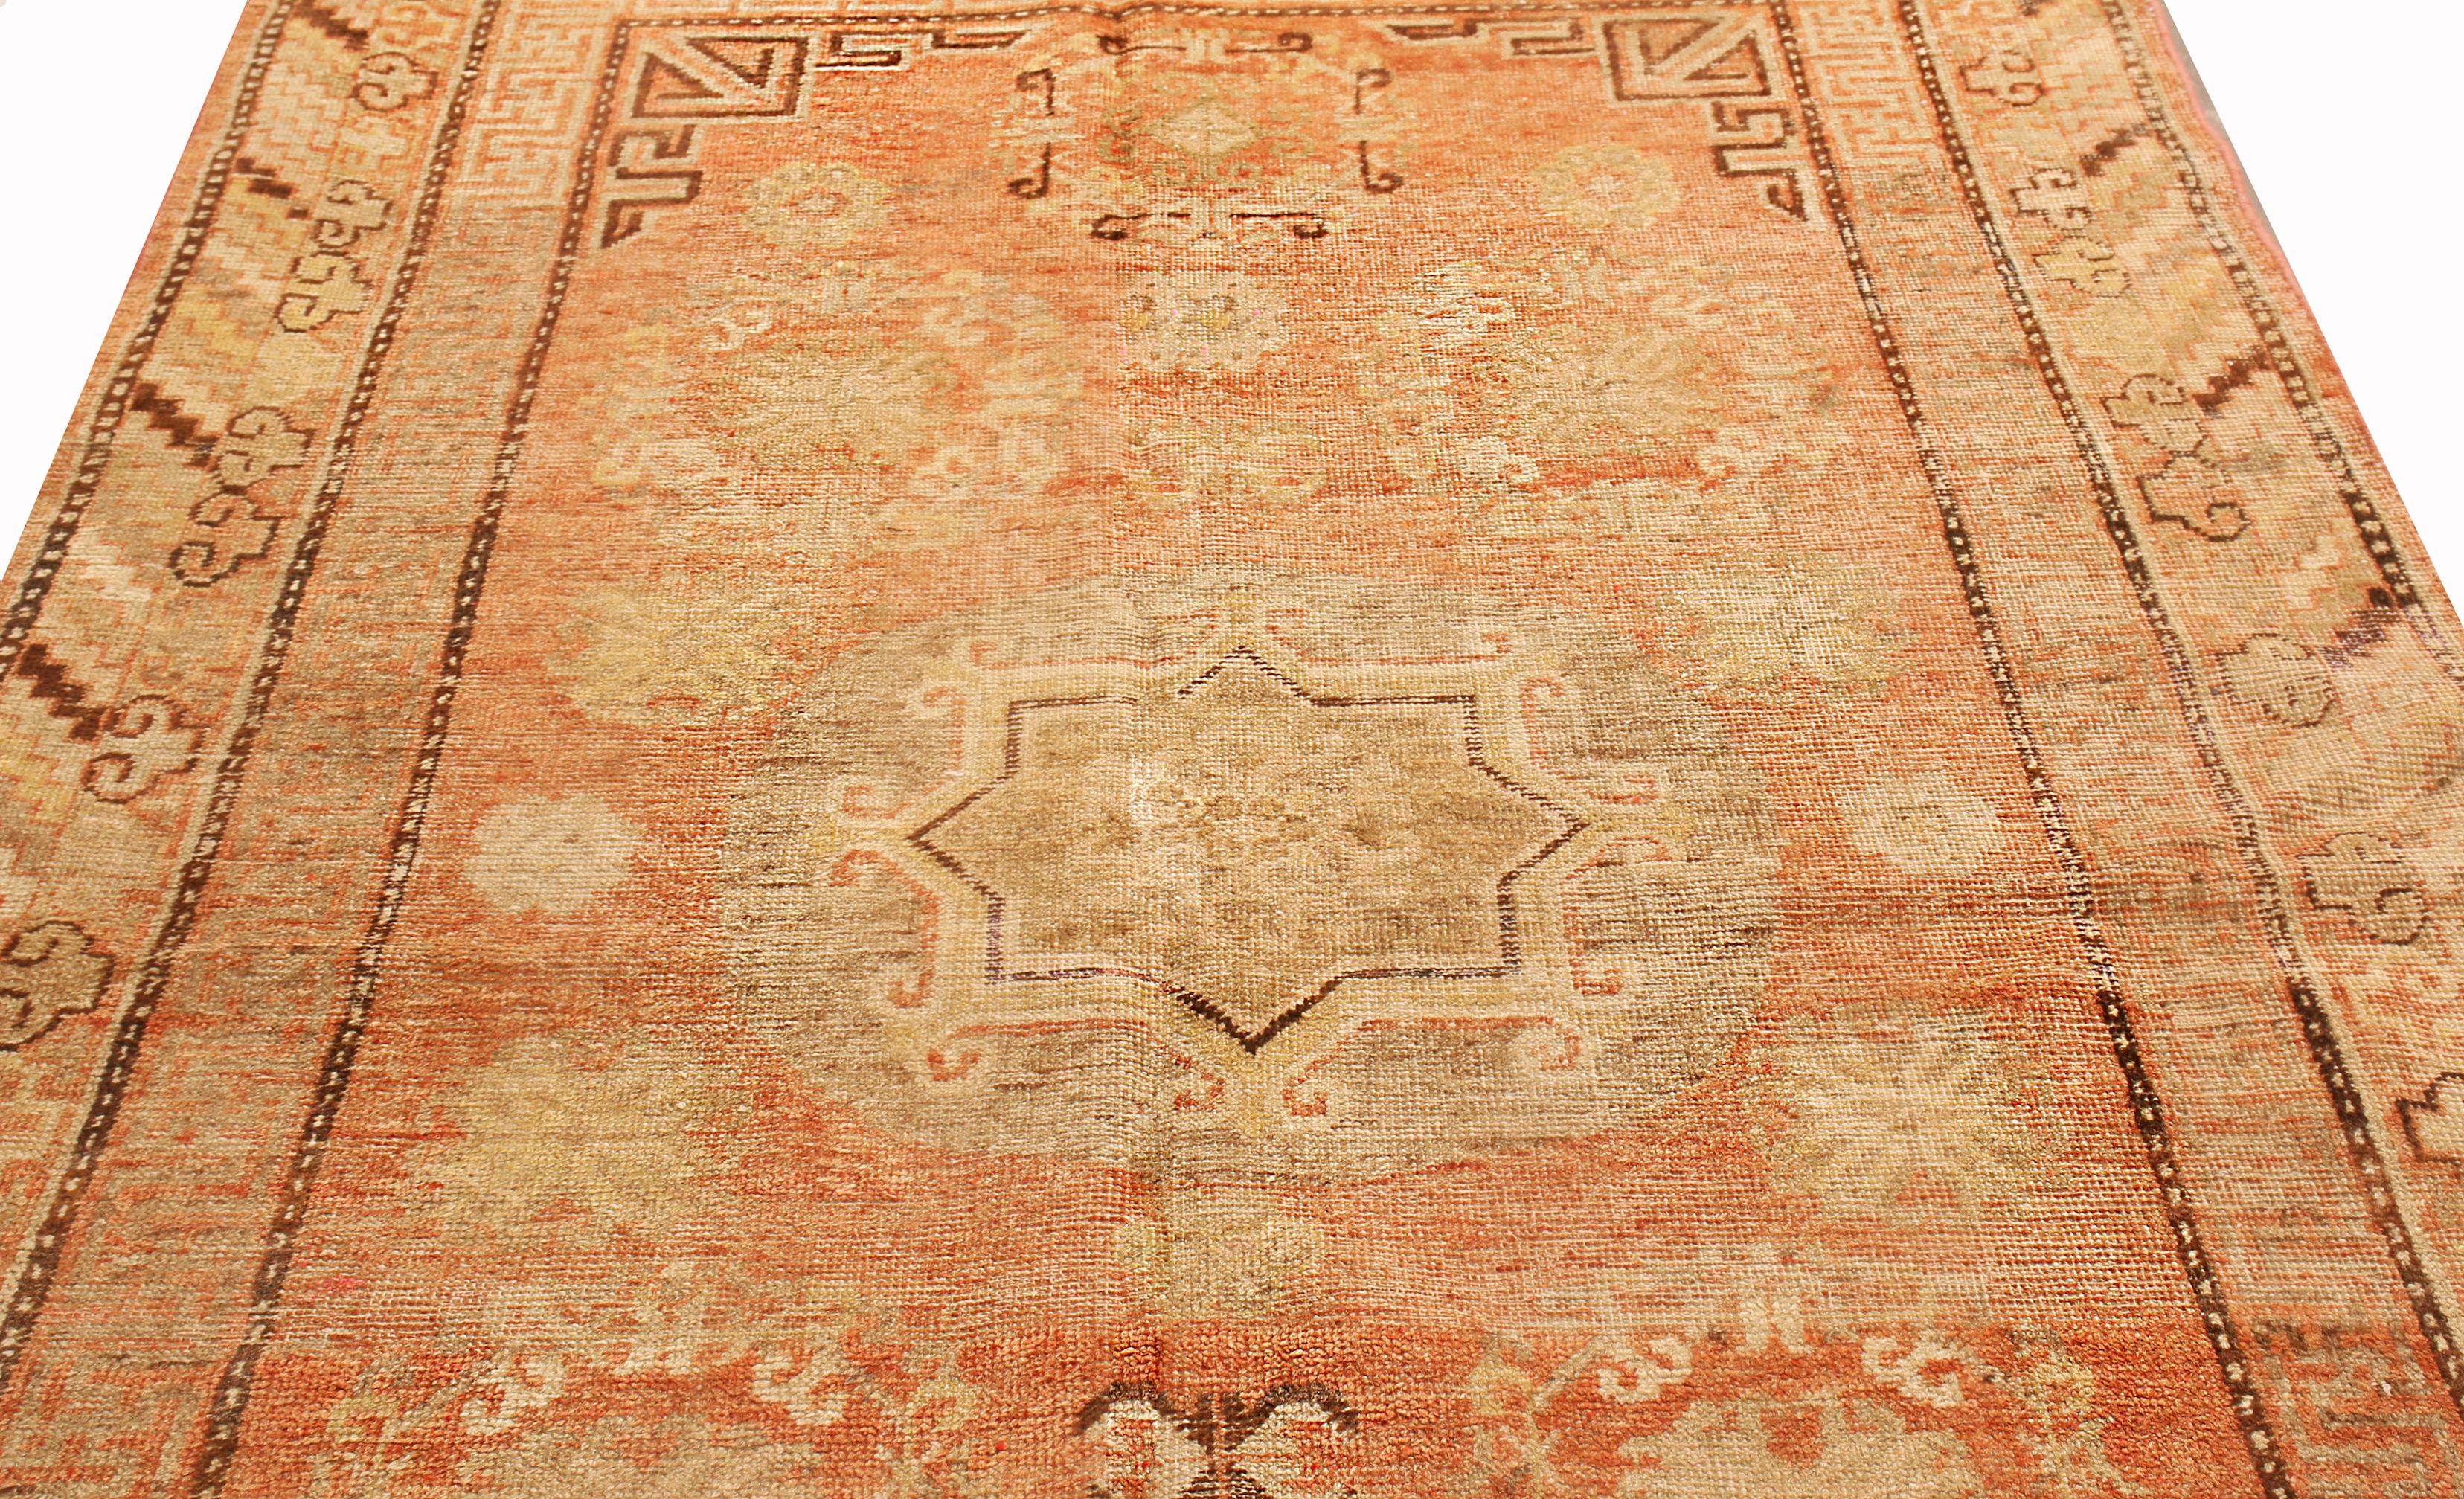 Originating from East Turkestan between 1900-1920, this antique transitional Khotan rug has a lesser known, once-acclaimed field design. Handwoven in durable, high quality wool, the central medallion depicts an ornate eight-pointed star, a